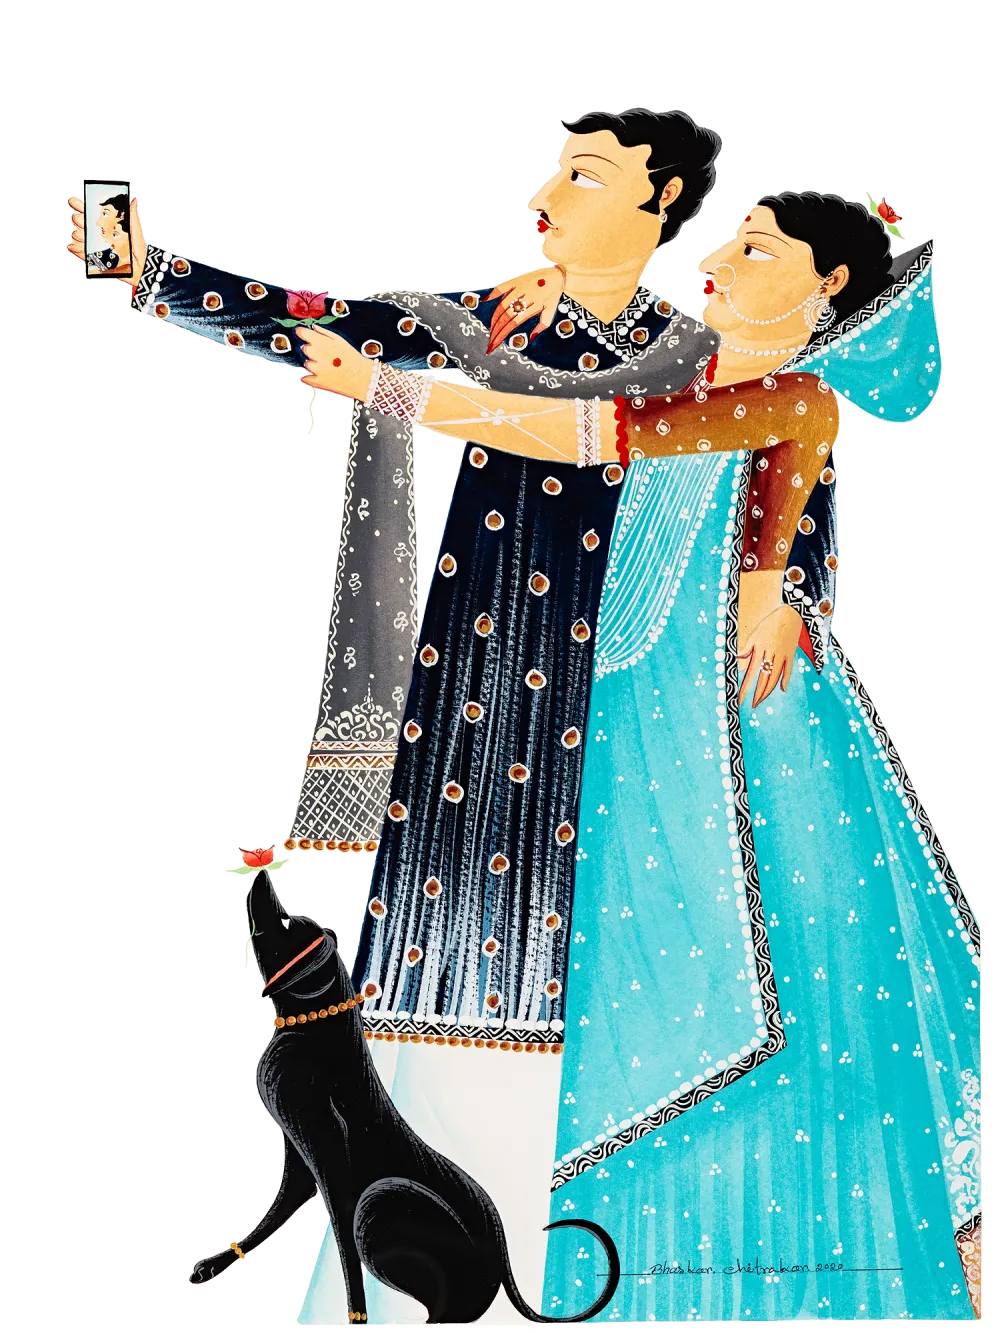 painted image of two people holding a phone taking a selfie in colorful garments with dog at bottom